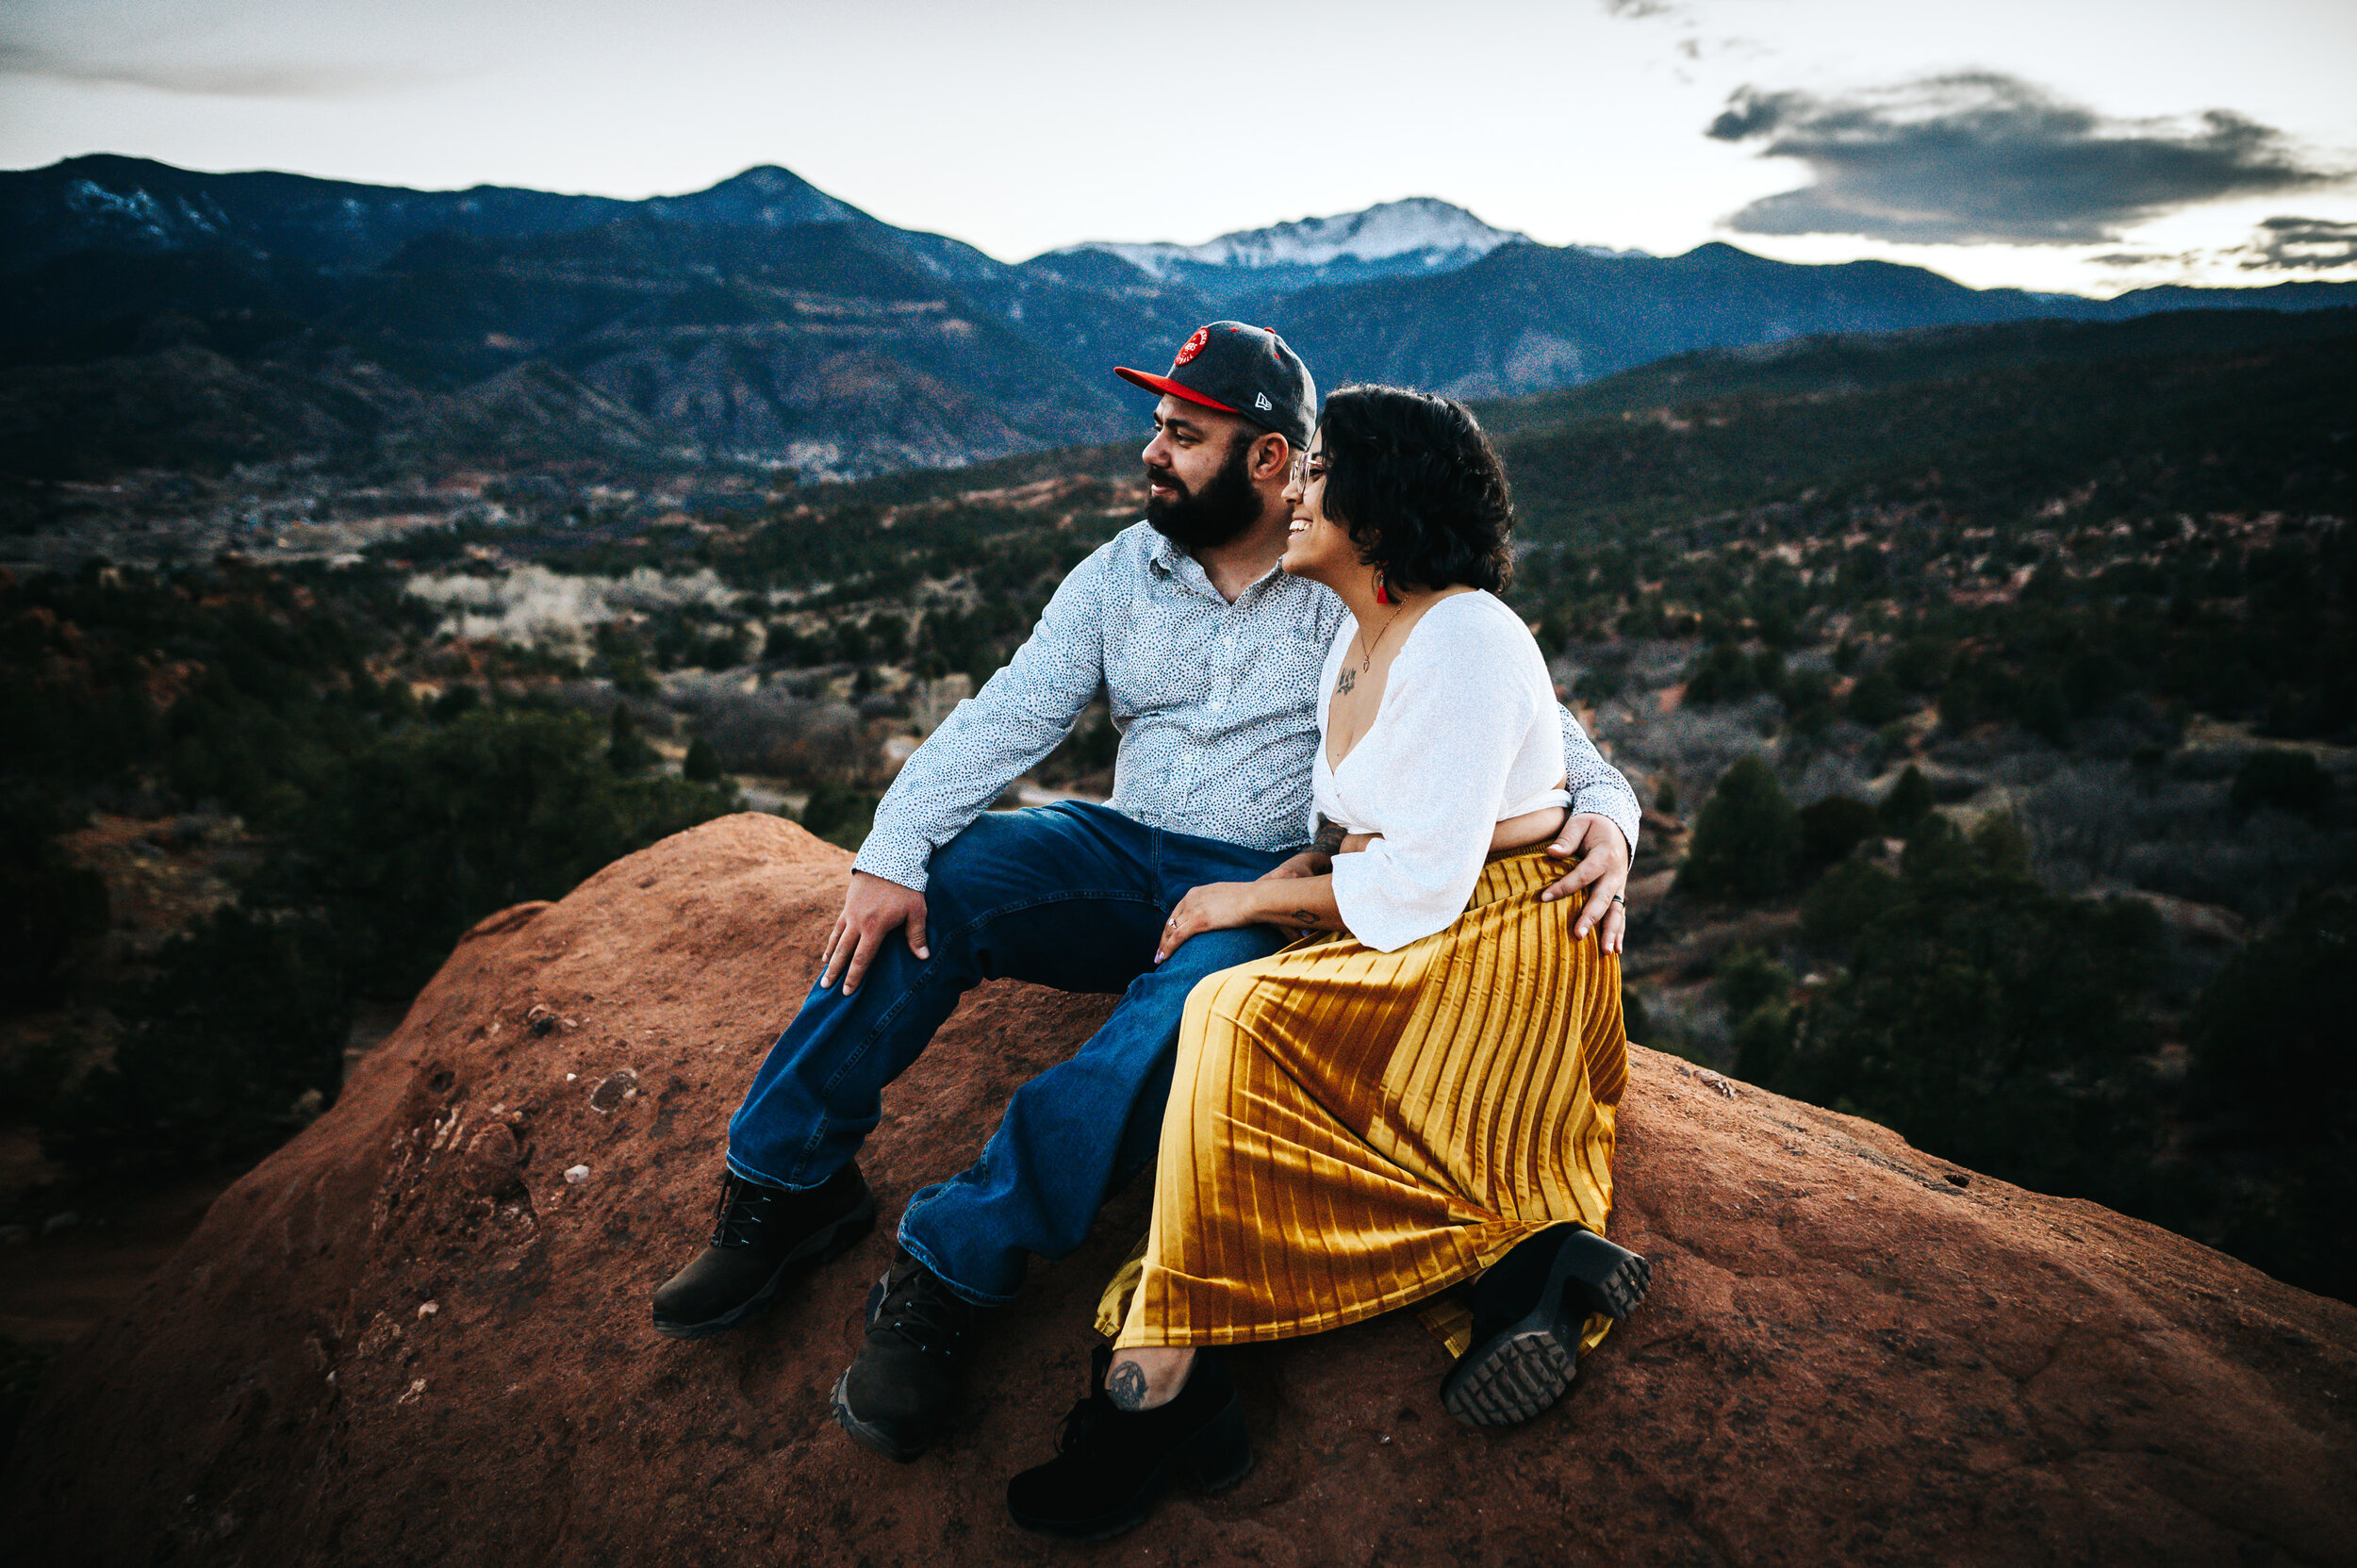 Caroline and Tommy Engagement Session Colorado Springs Colorado Garden of the Gods Wild Prairie Photography-15-2021.jpg